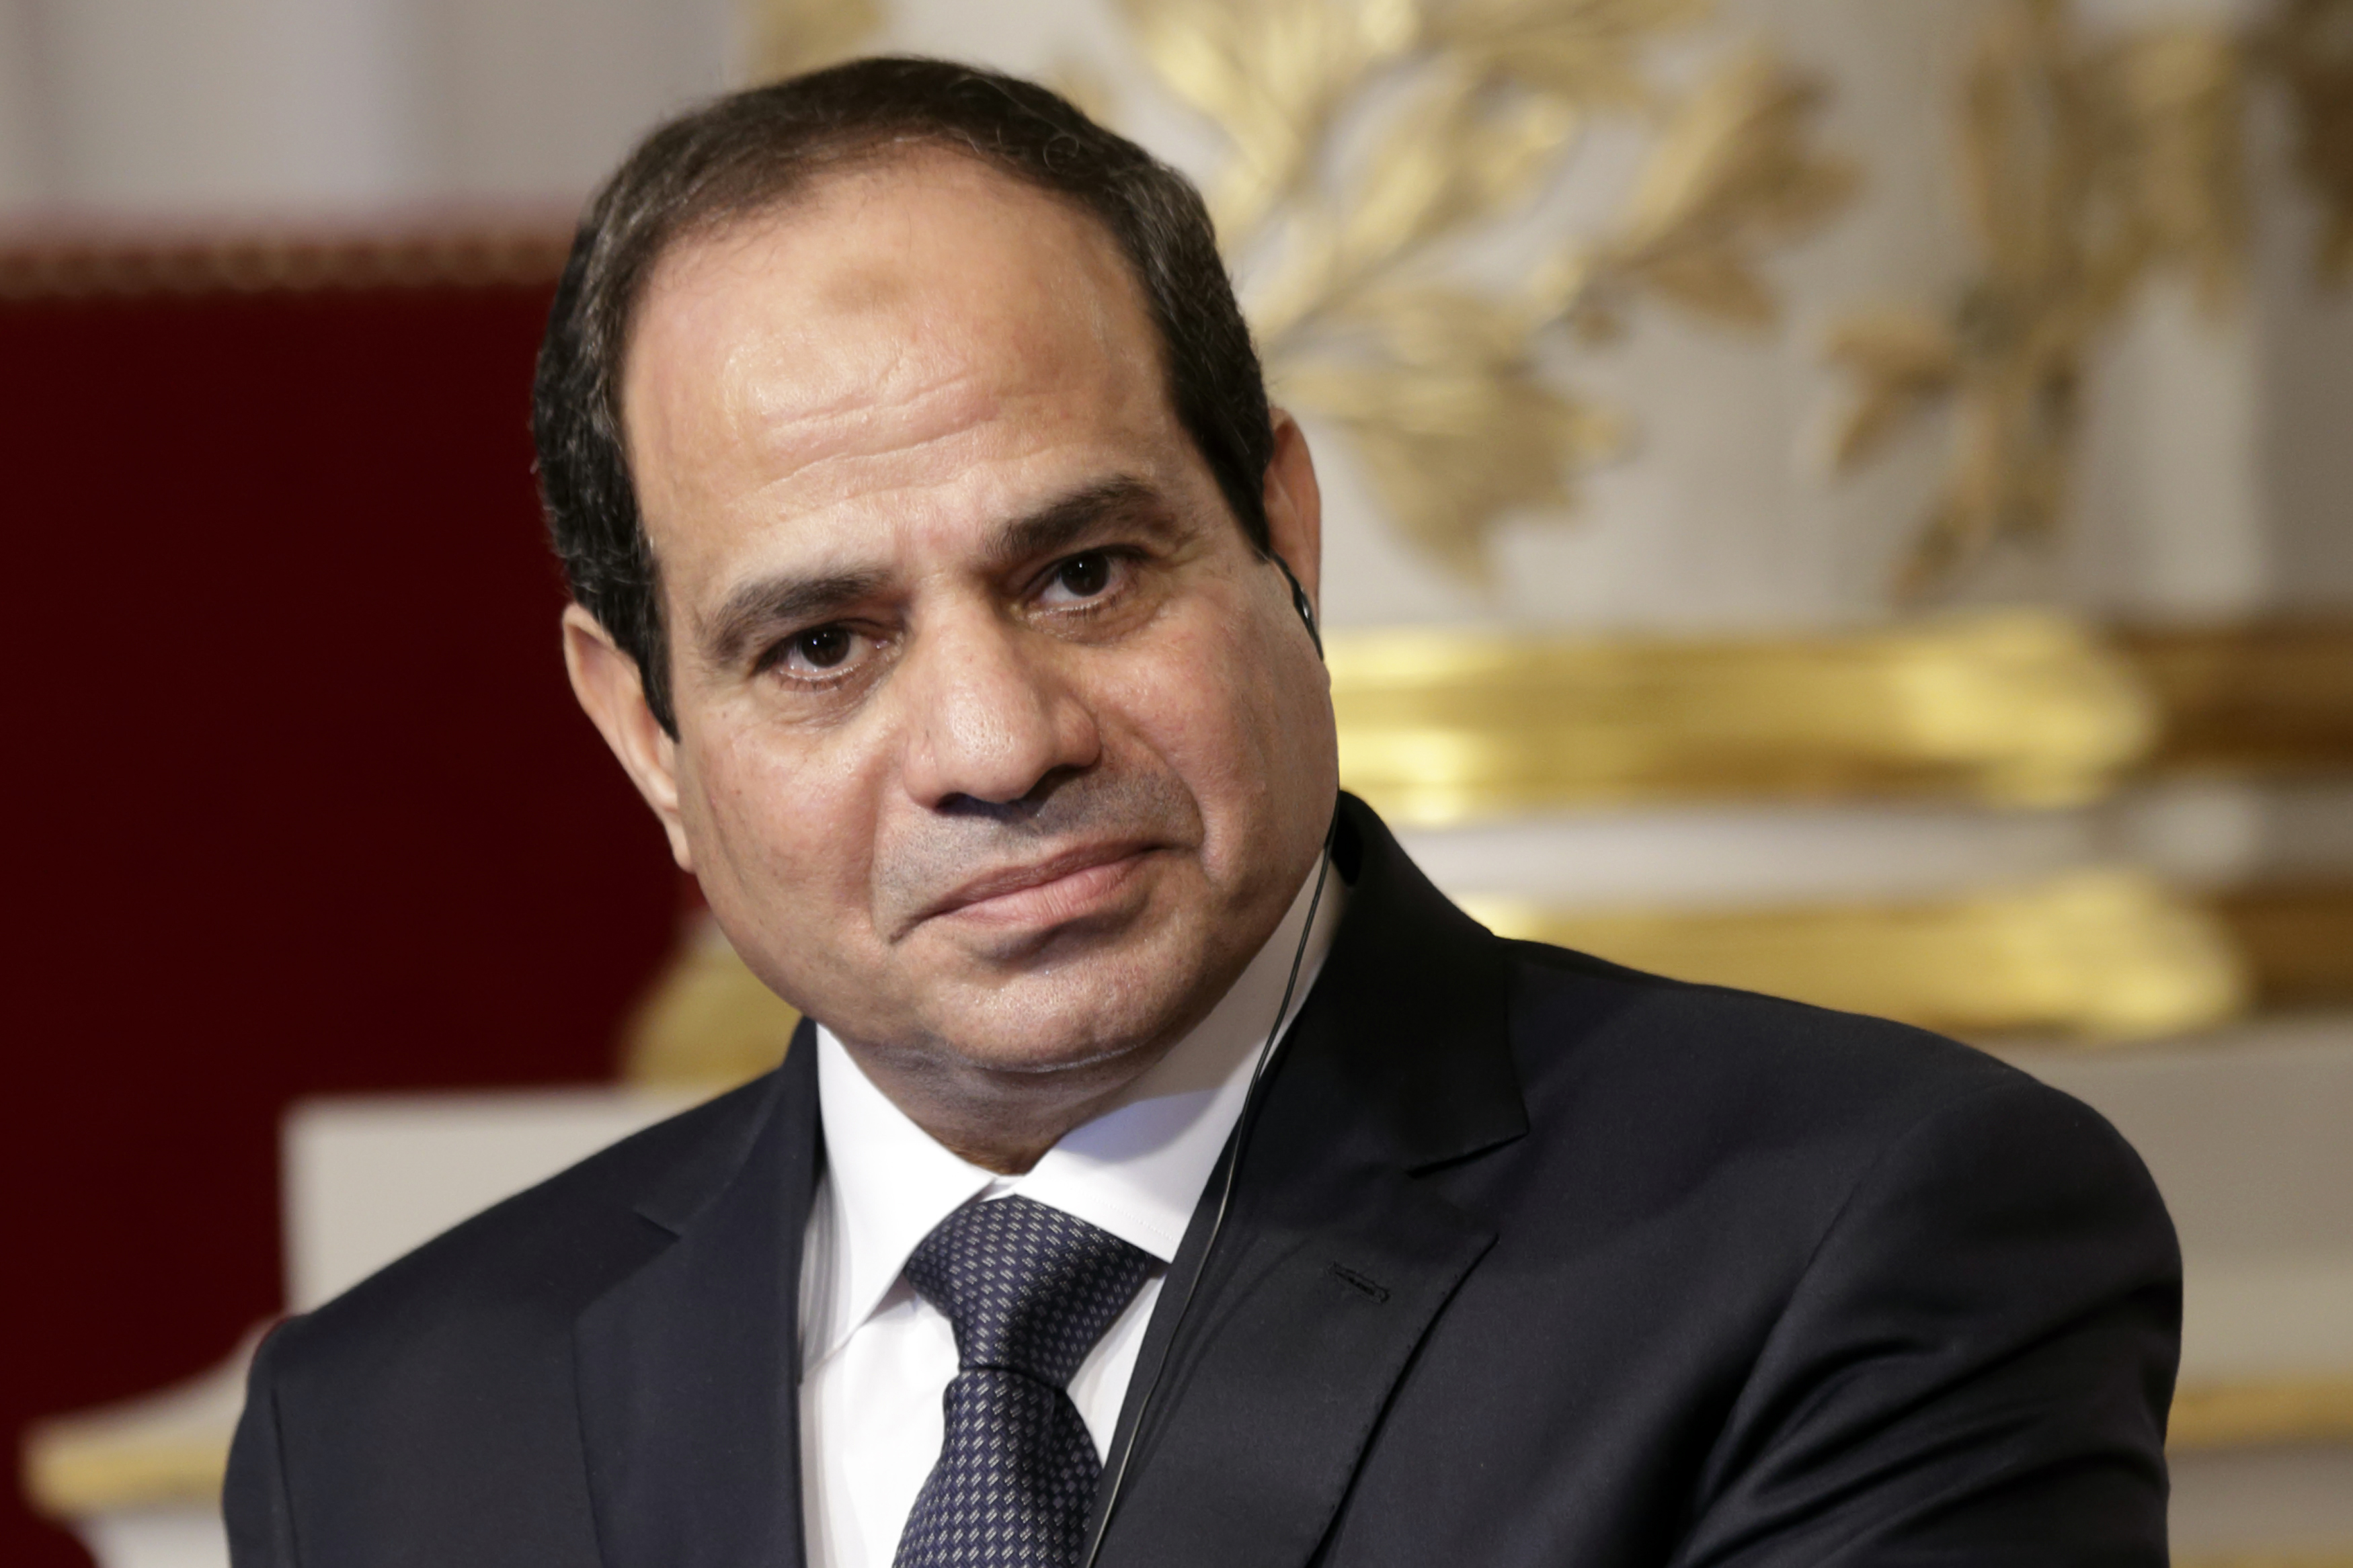 Egyptian President Abdel Fattah al-Sisi delivers a statement following a meeting with French President Francois Hollande at the Elysee Palace in Paris, November 26, 2014. REUTERS/Philippe Wojazer (FRANCE - Tags: POLITICS HEADSHOT) - RTR4FORT